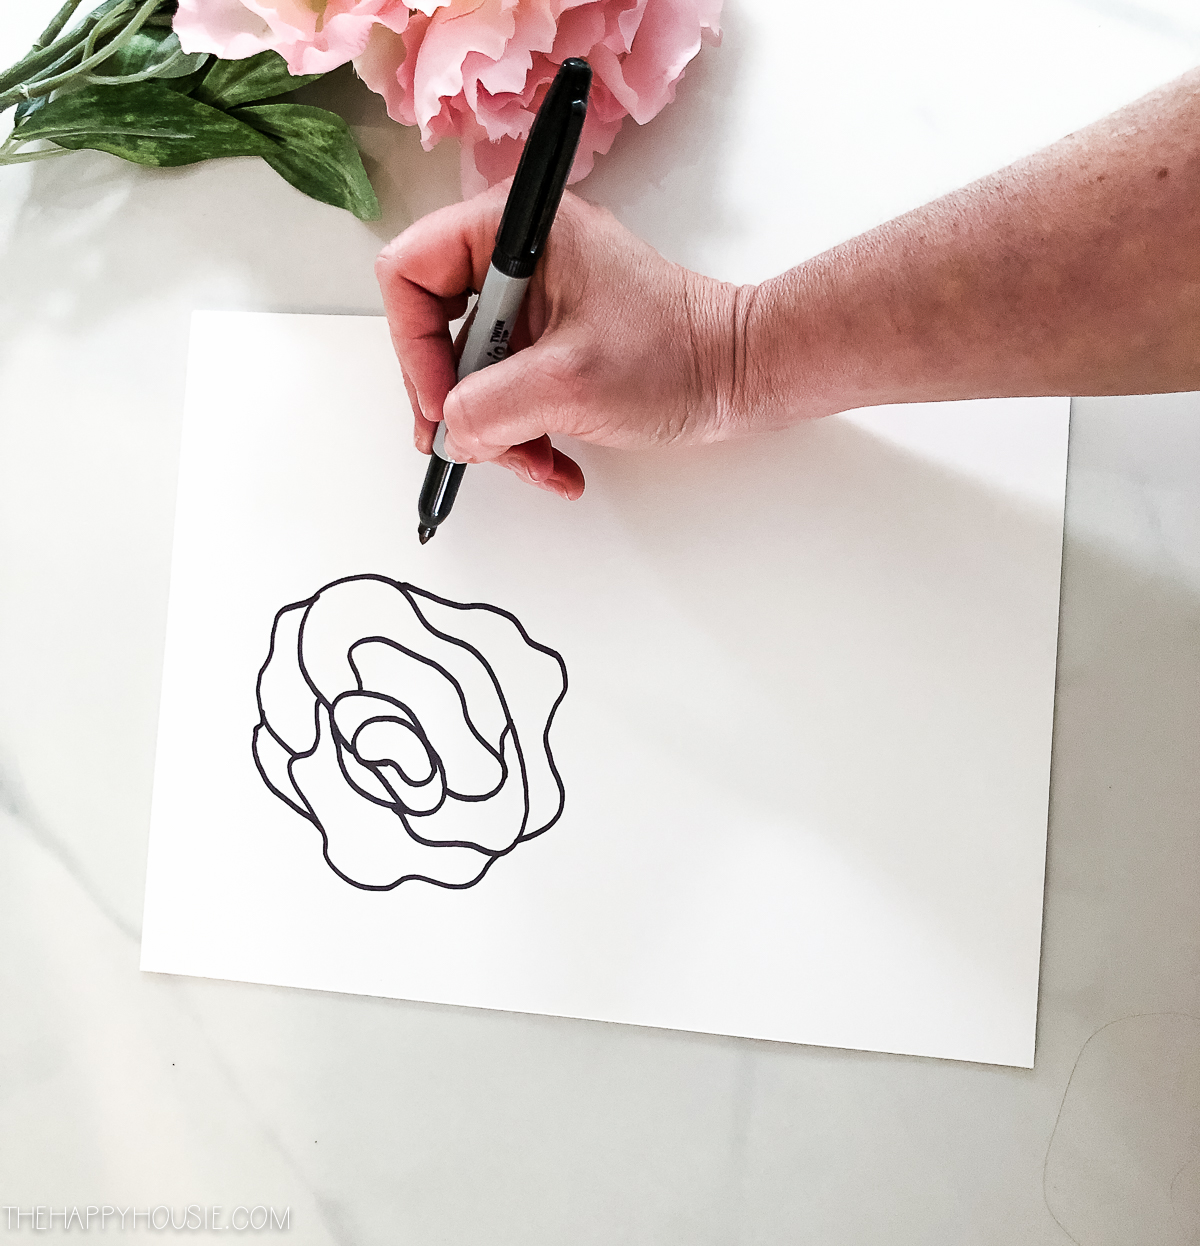 The drawing on a white paper.